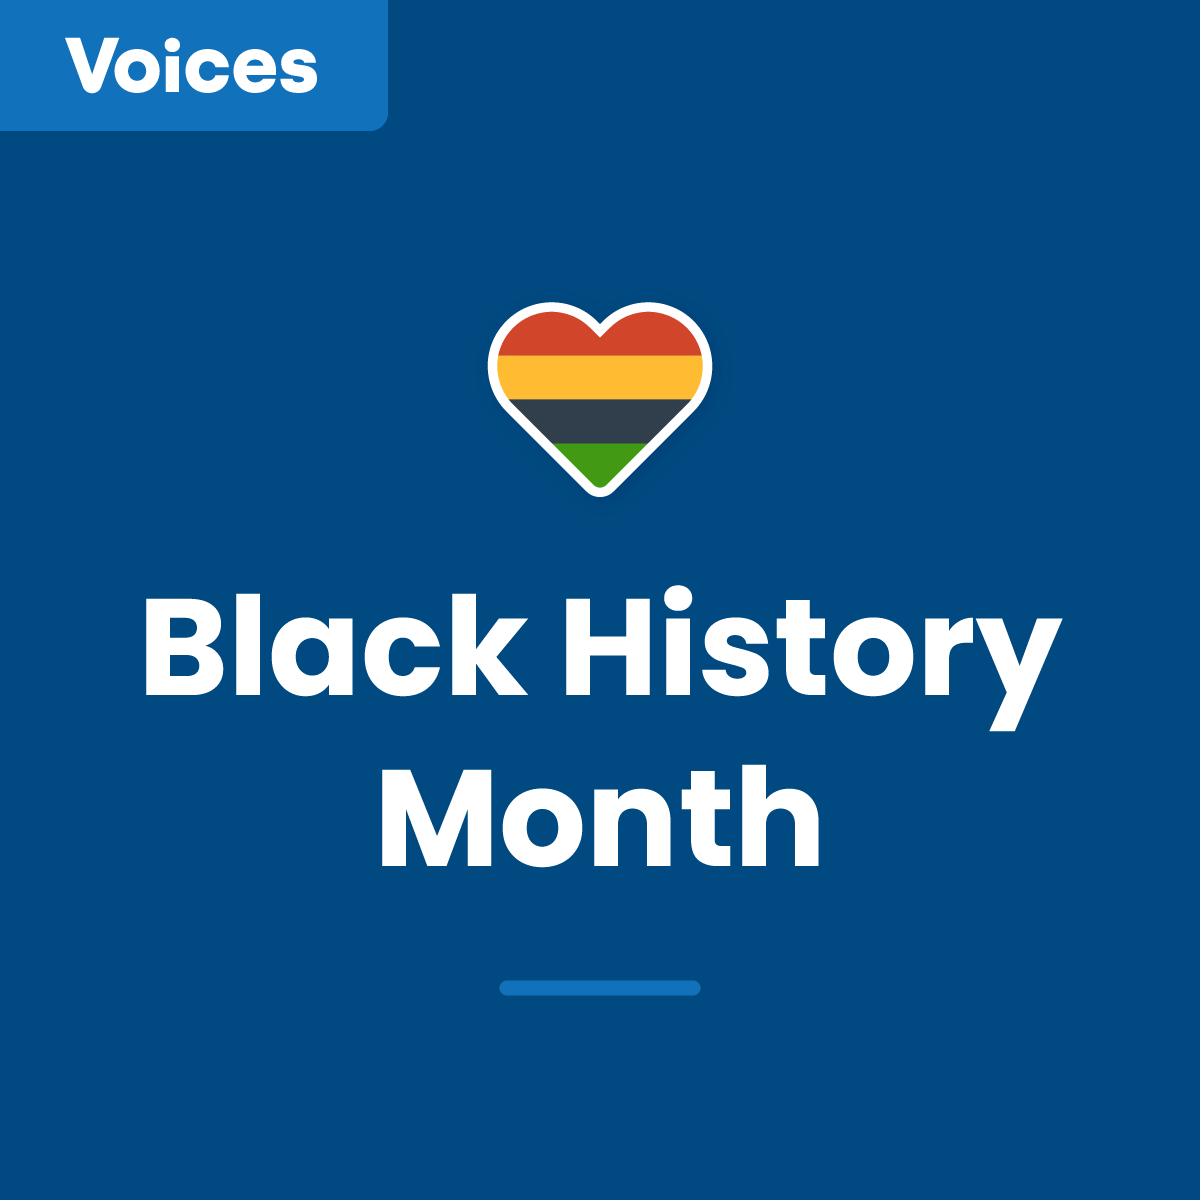 Freelance Voice Over Marketplace In Canada Just Donated For Black History Month